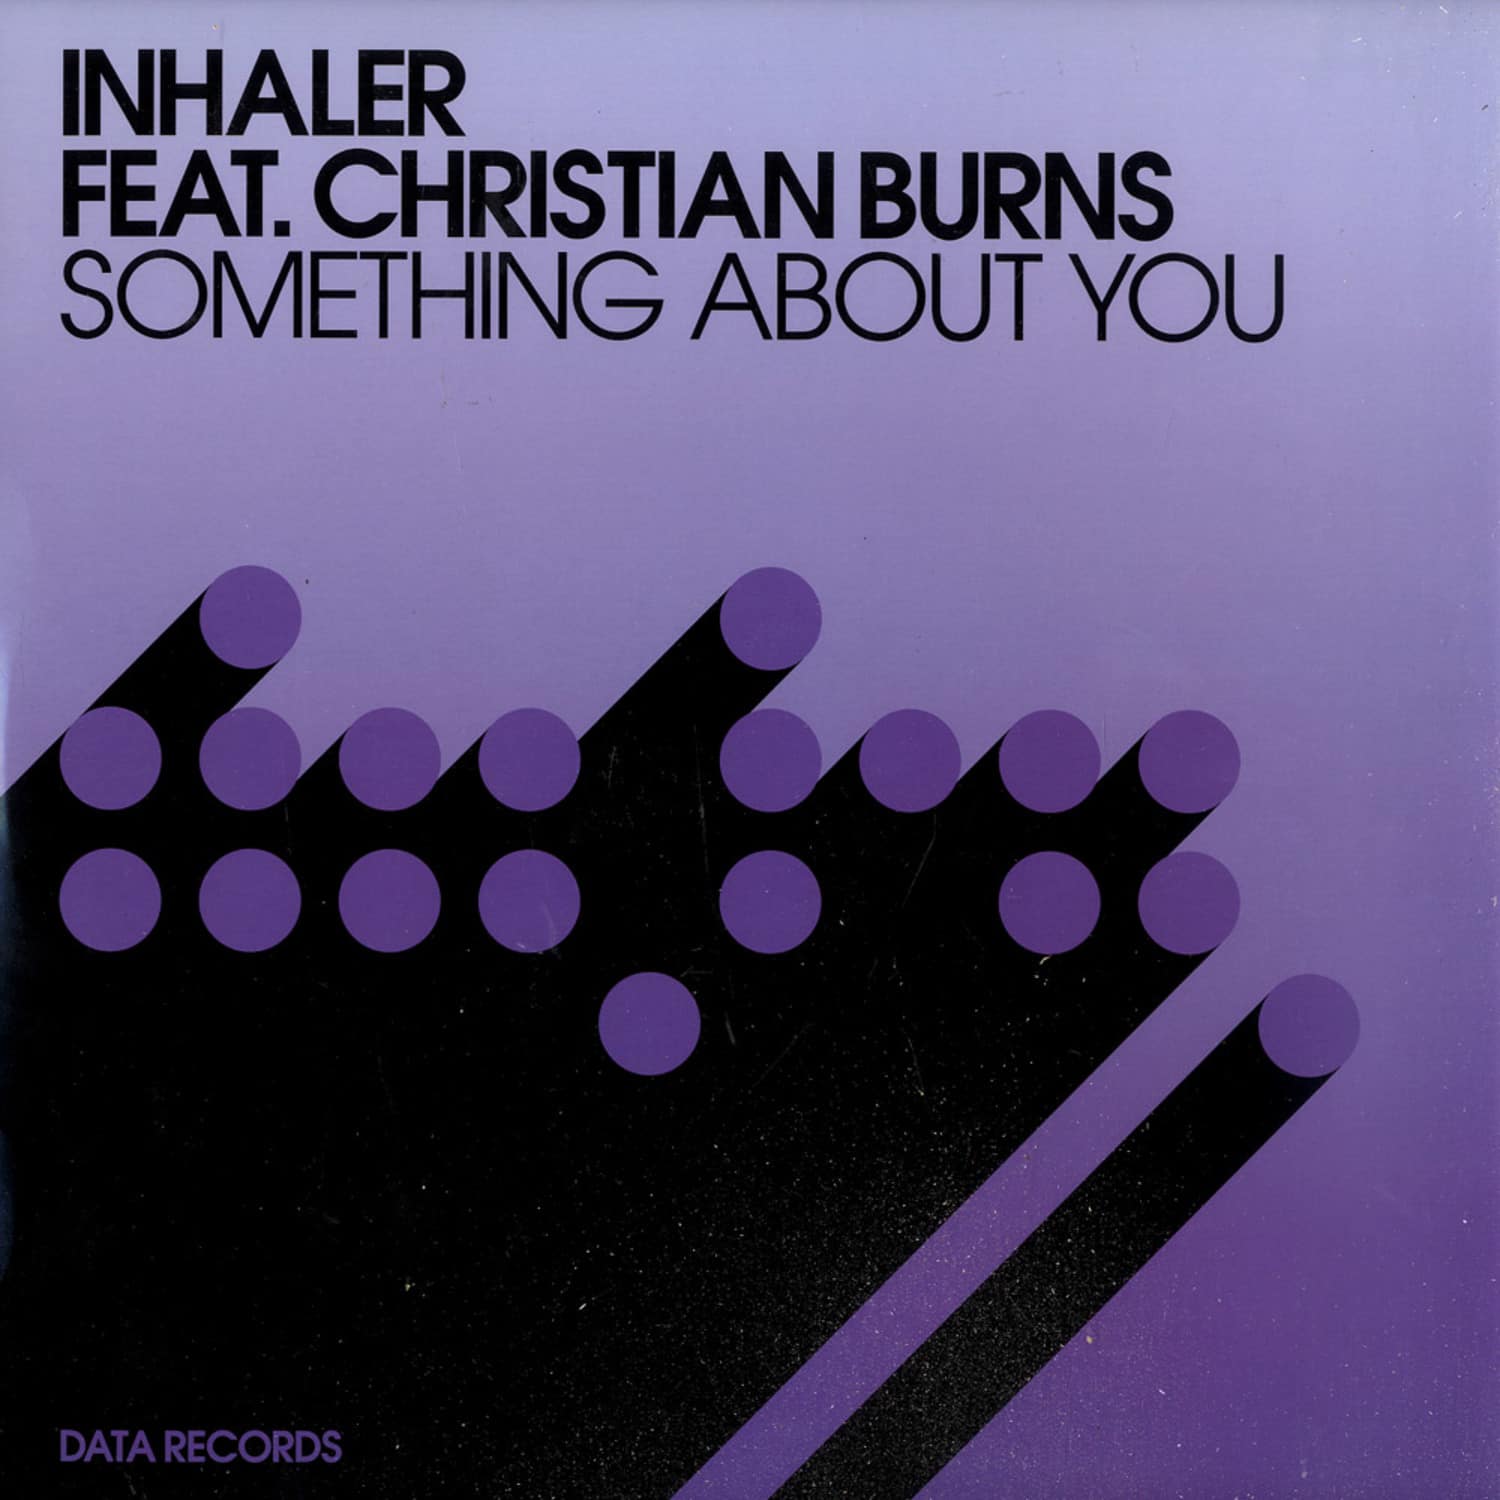 Inhaler feat. Christian Burns - SOMETHING ABOUT YOU